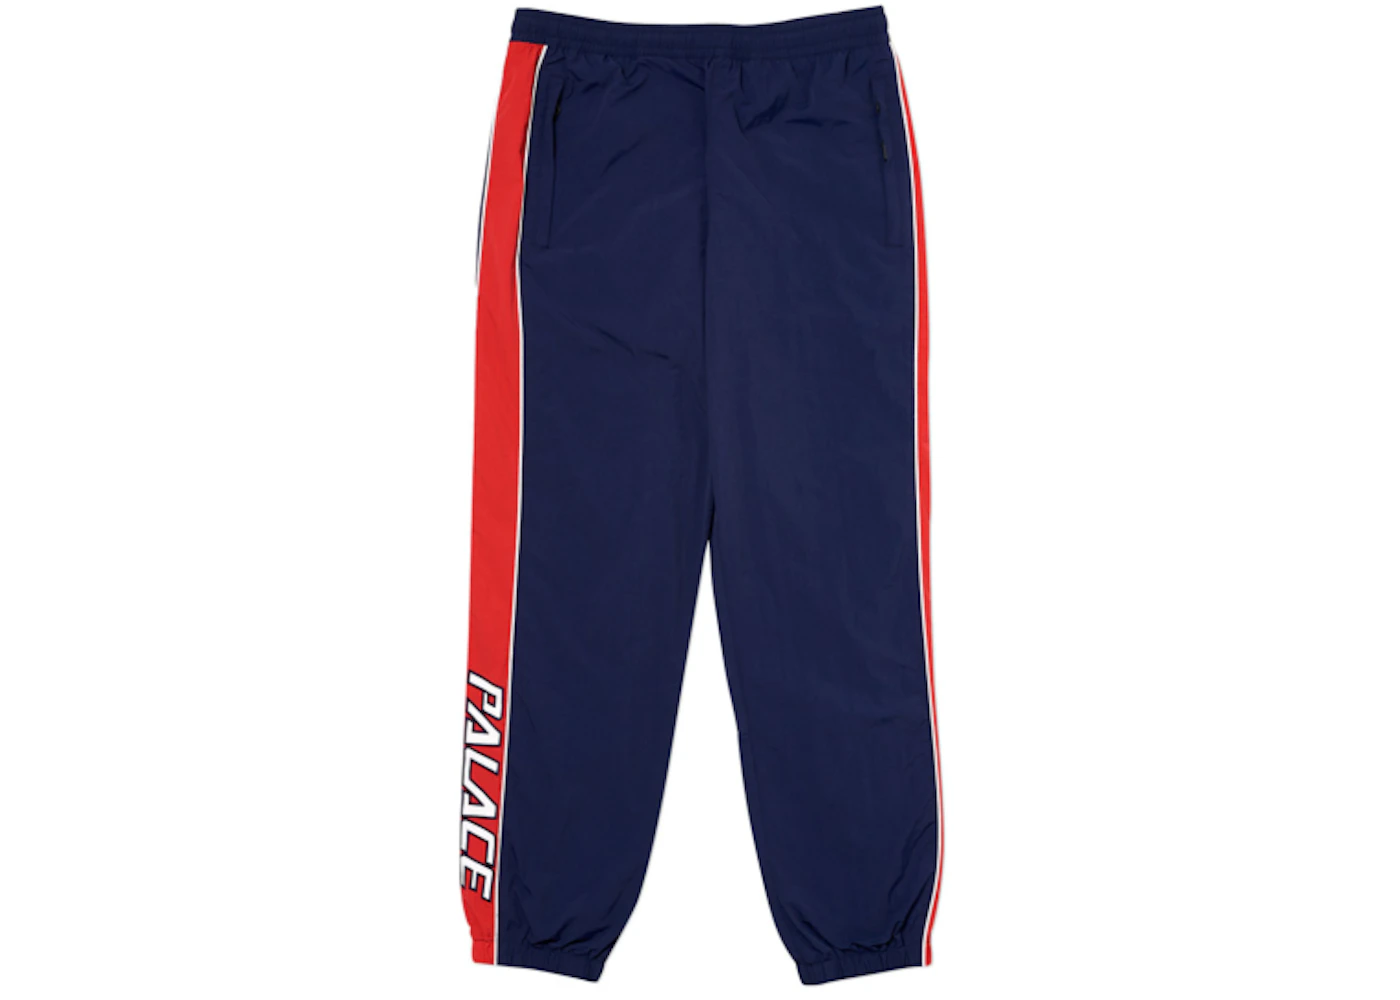 Palace Racer Shell Bottoms Navy Men's - FW19 - US